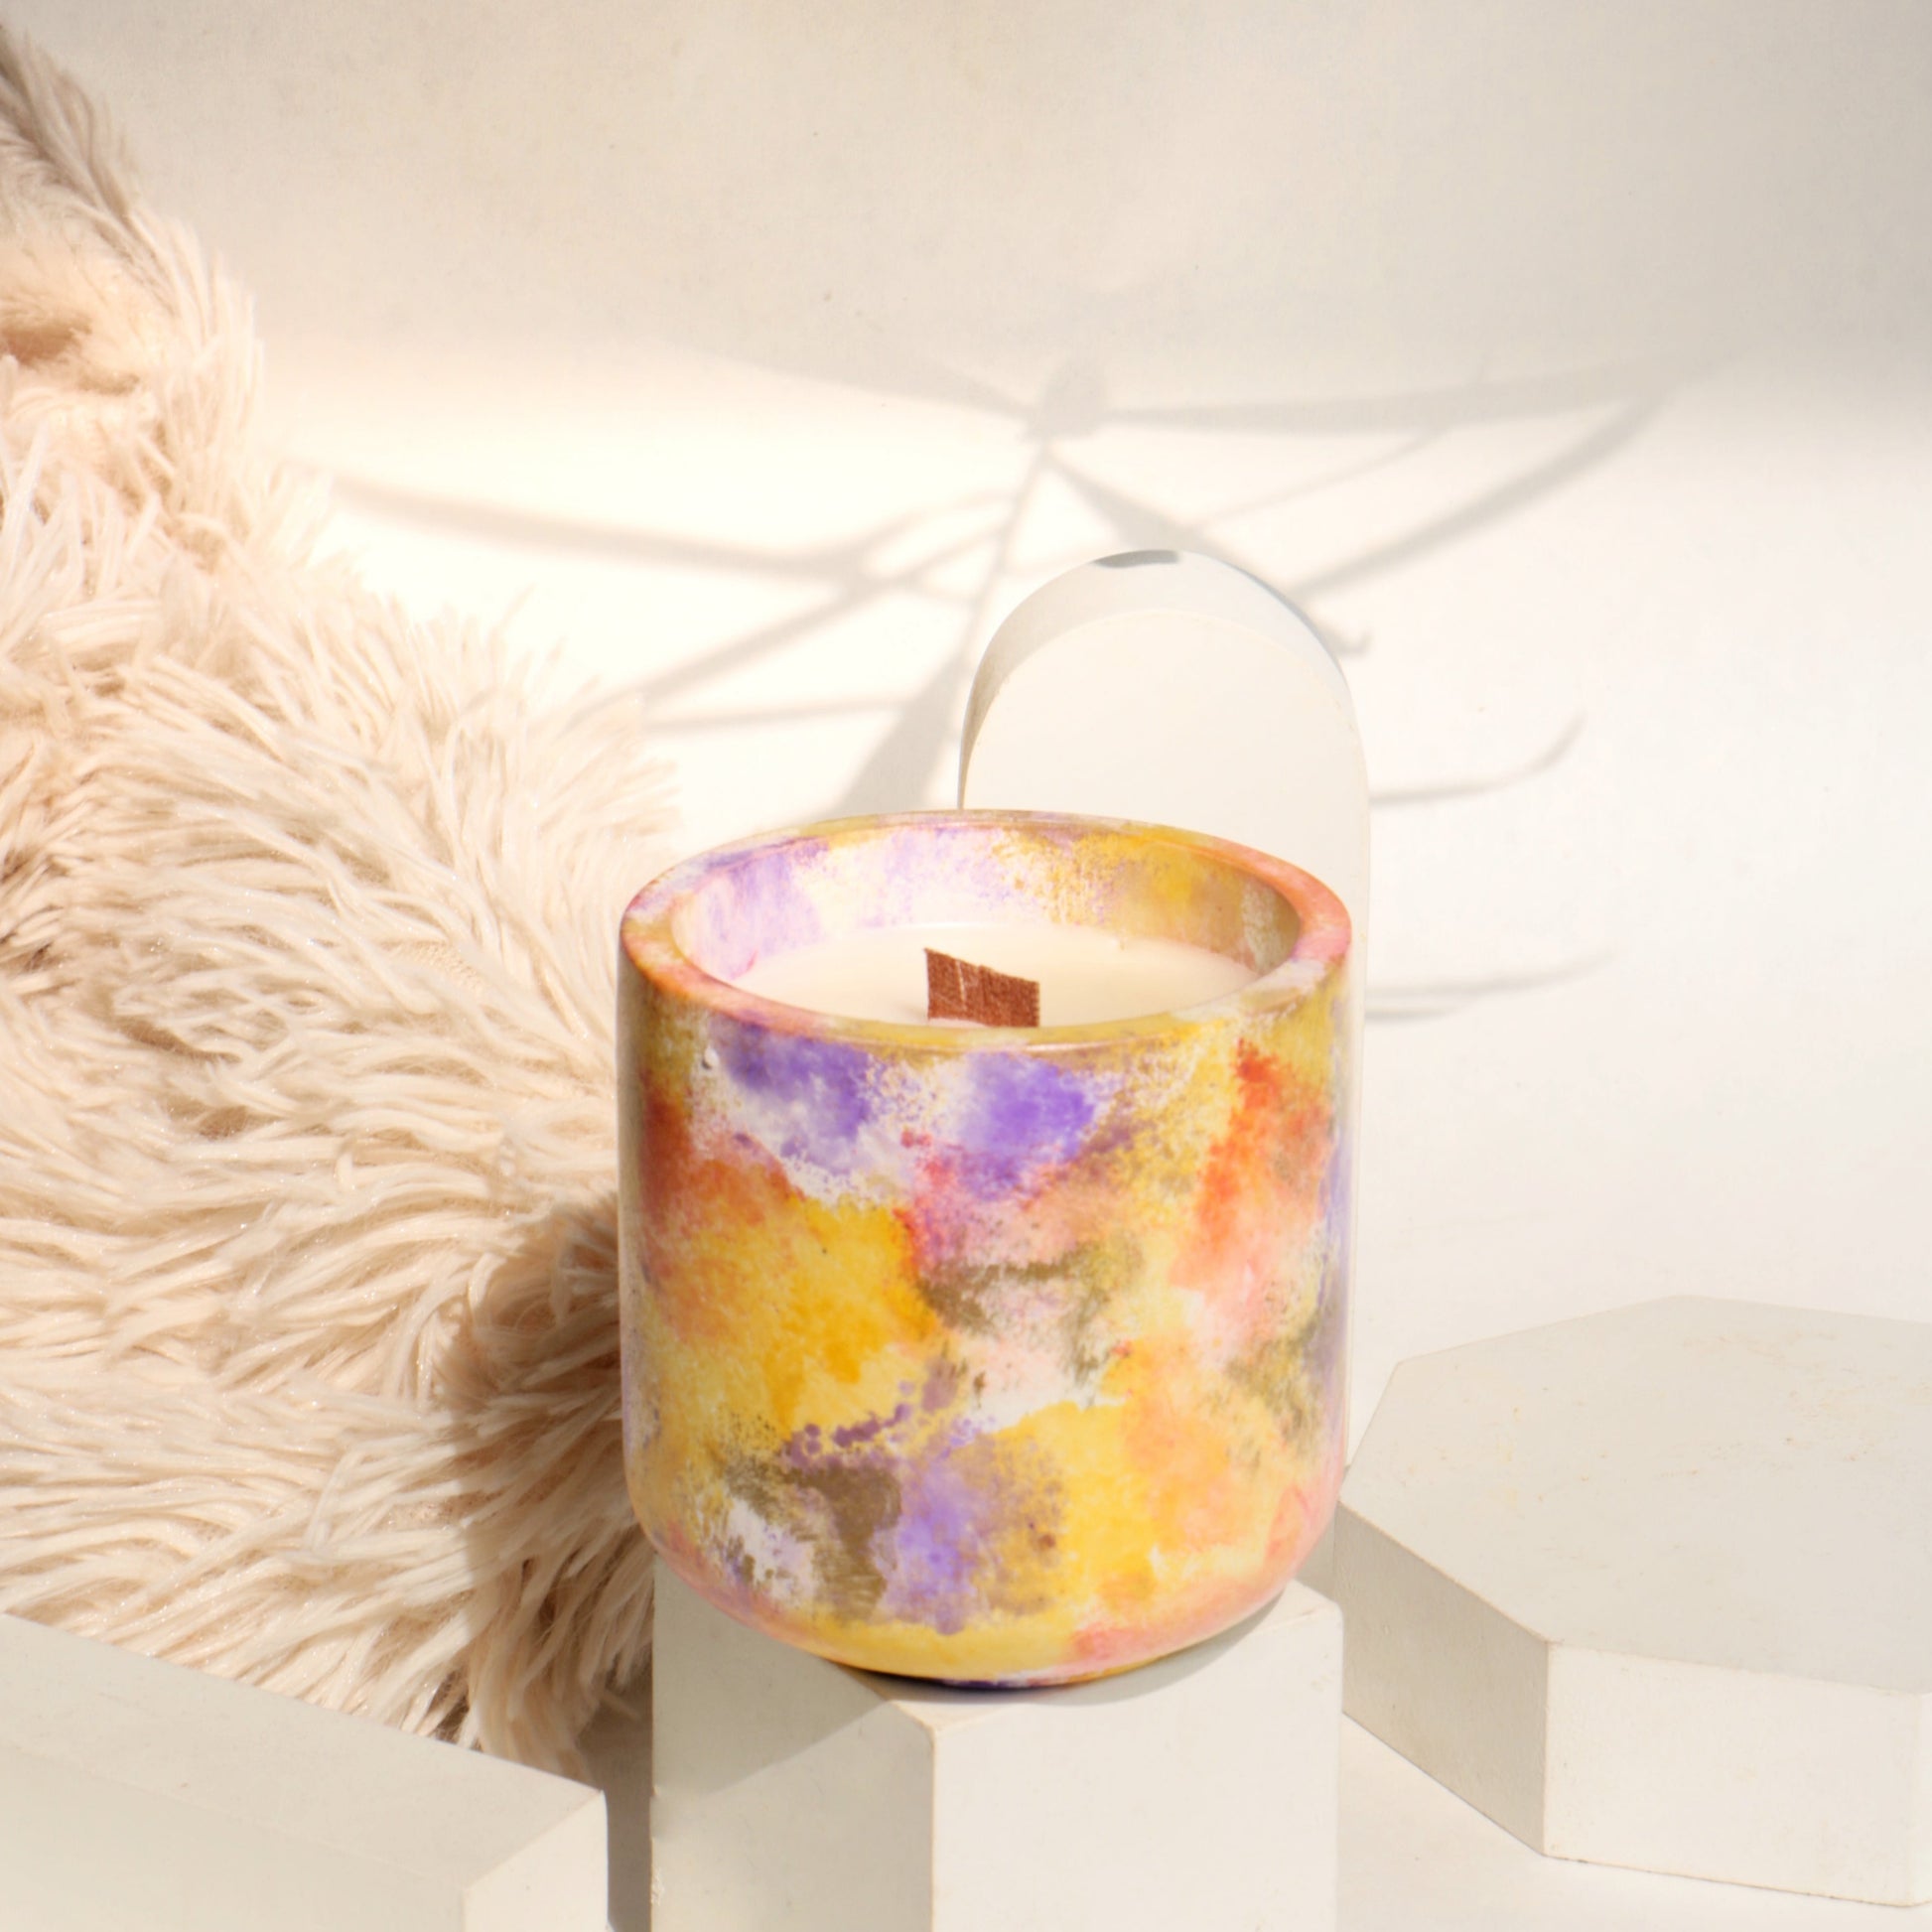 Lavender candle promoting relaxation and calmness.